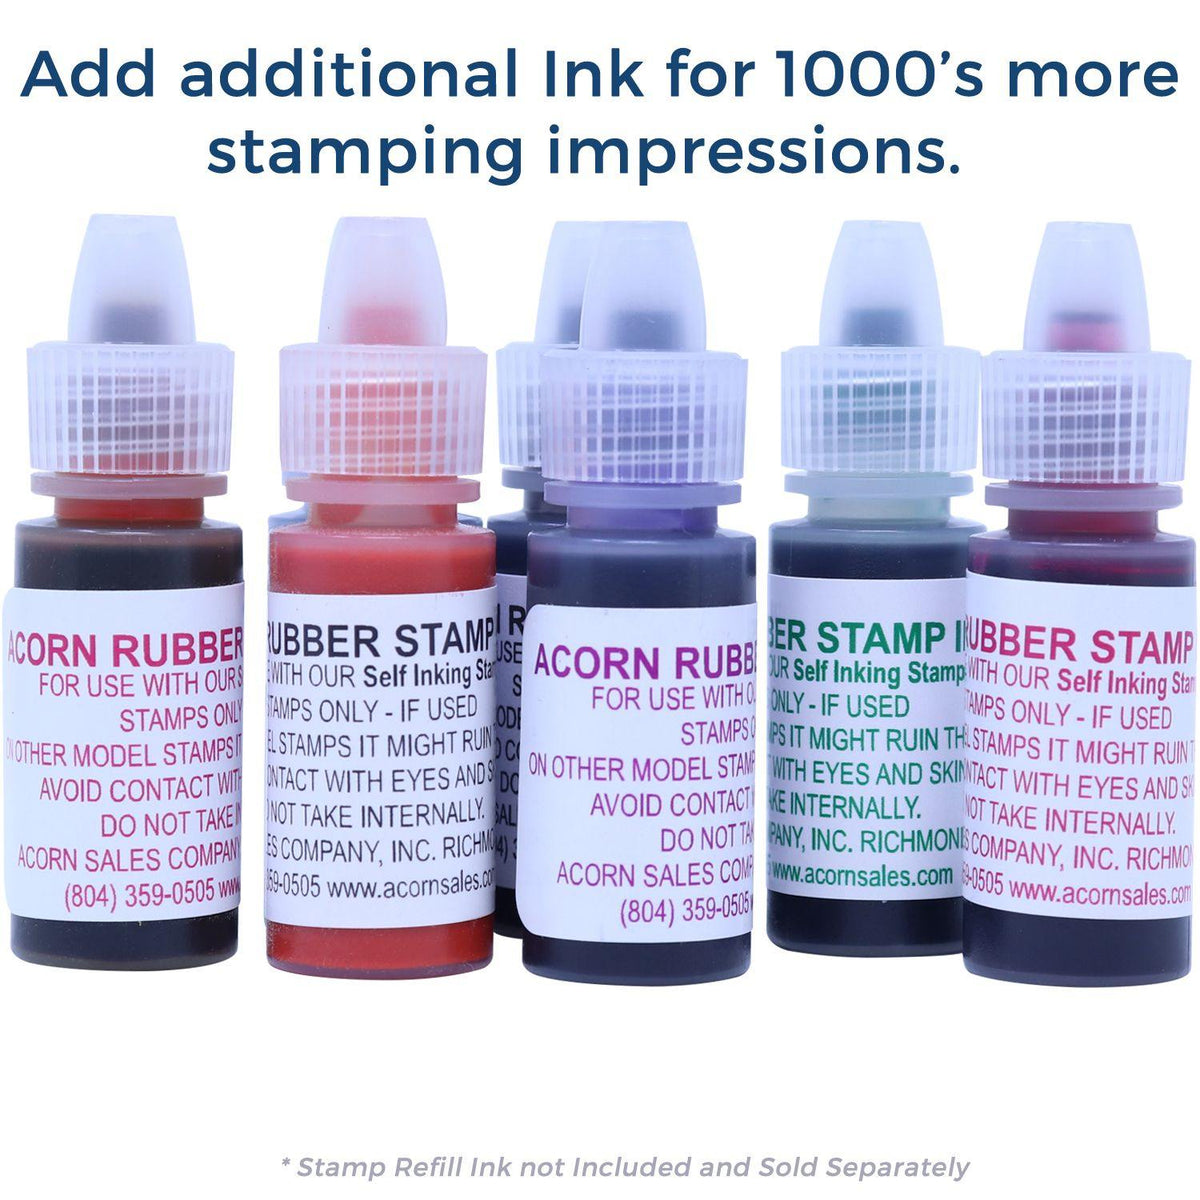 Refill Inks for Large Pre Inked Deposition Exhibit Stamp Available